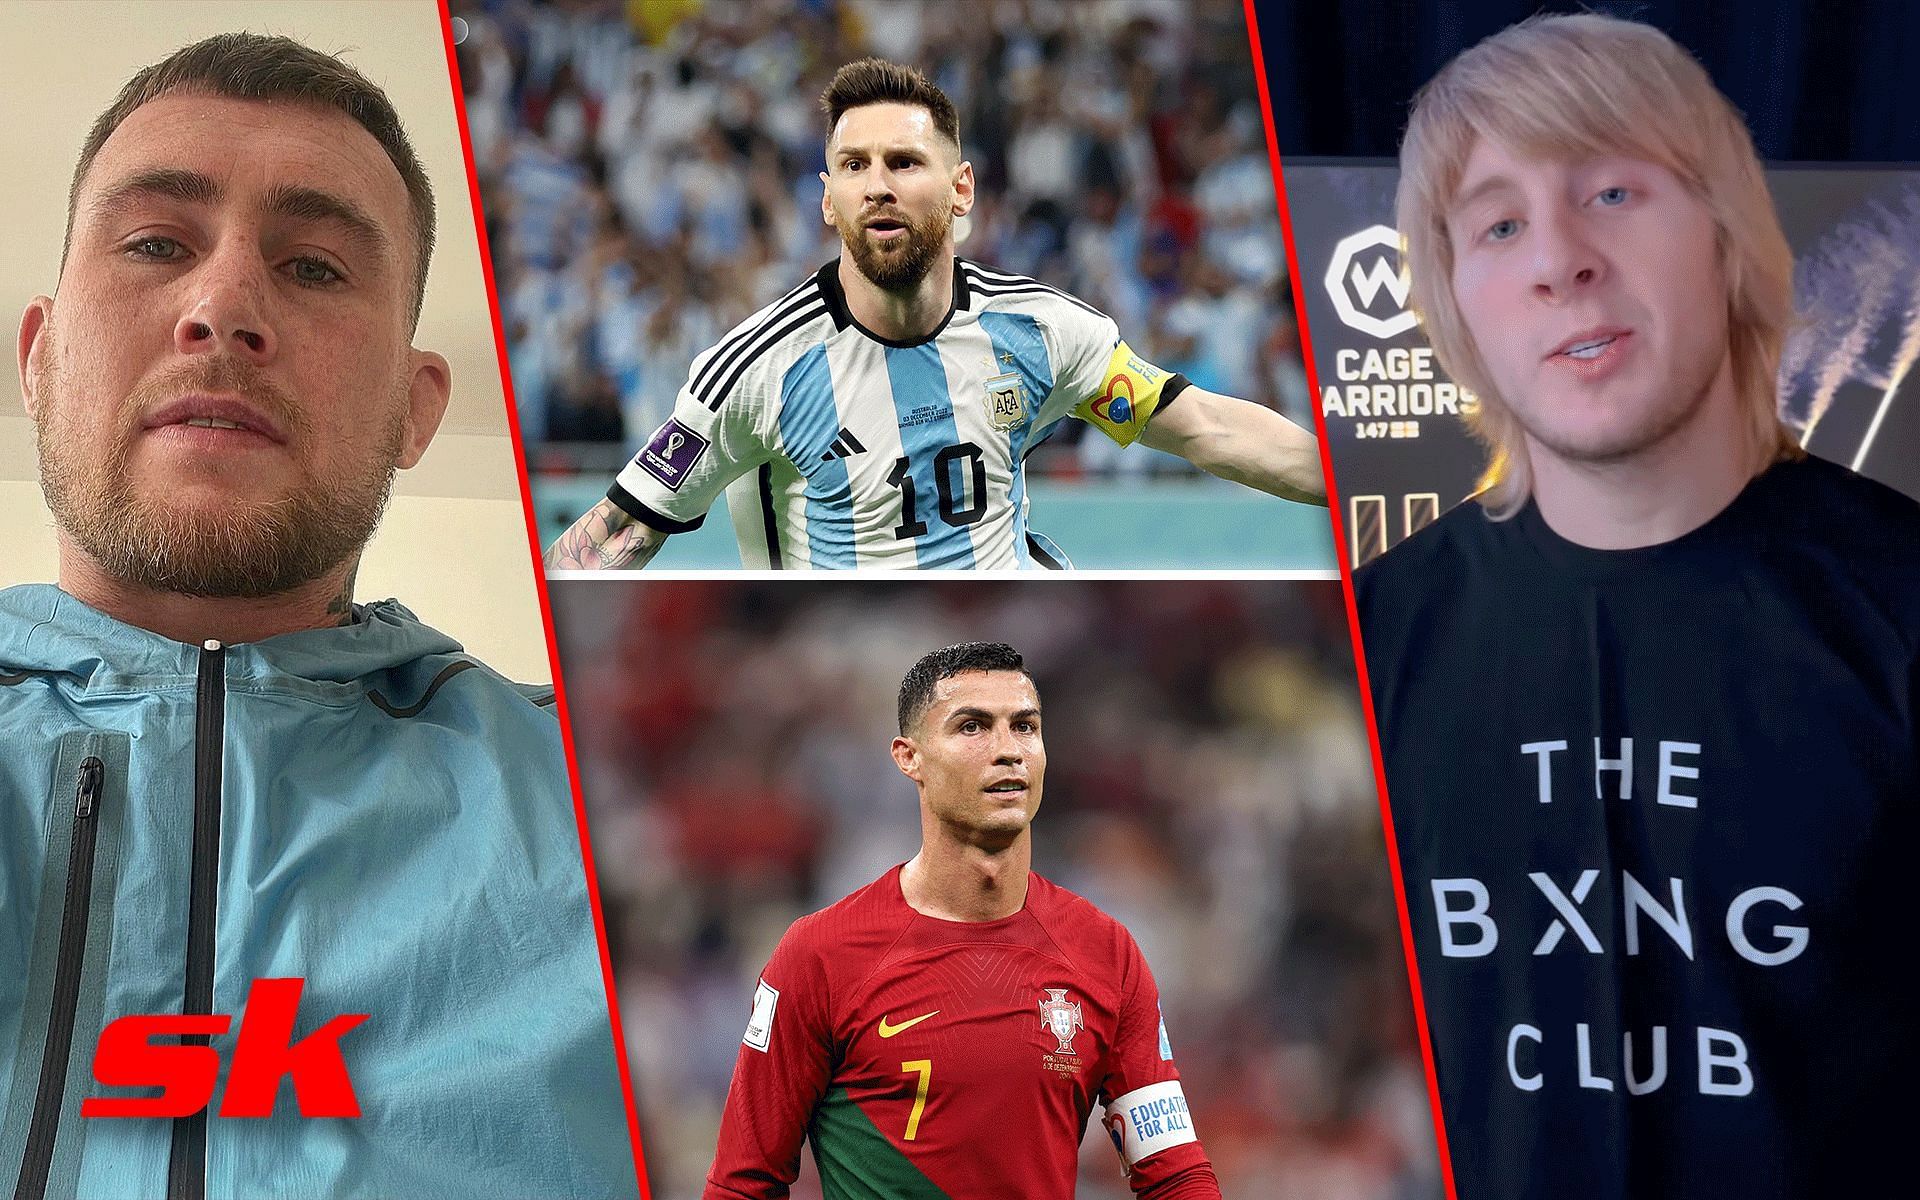 Darren Till (left) Cristiano Ronaldo and Lionel Messi (centre) and Paddy Pimblett (right) [Image Courtesy: @darrentill2.0 and @theufcbaddy on Instagram, Cristiano Ronaldo and Lionel Messi via Getty Images]